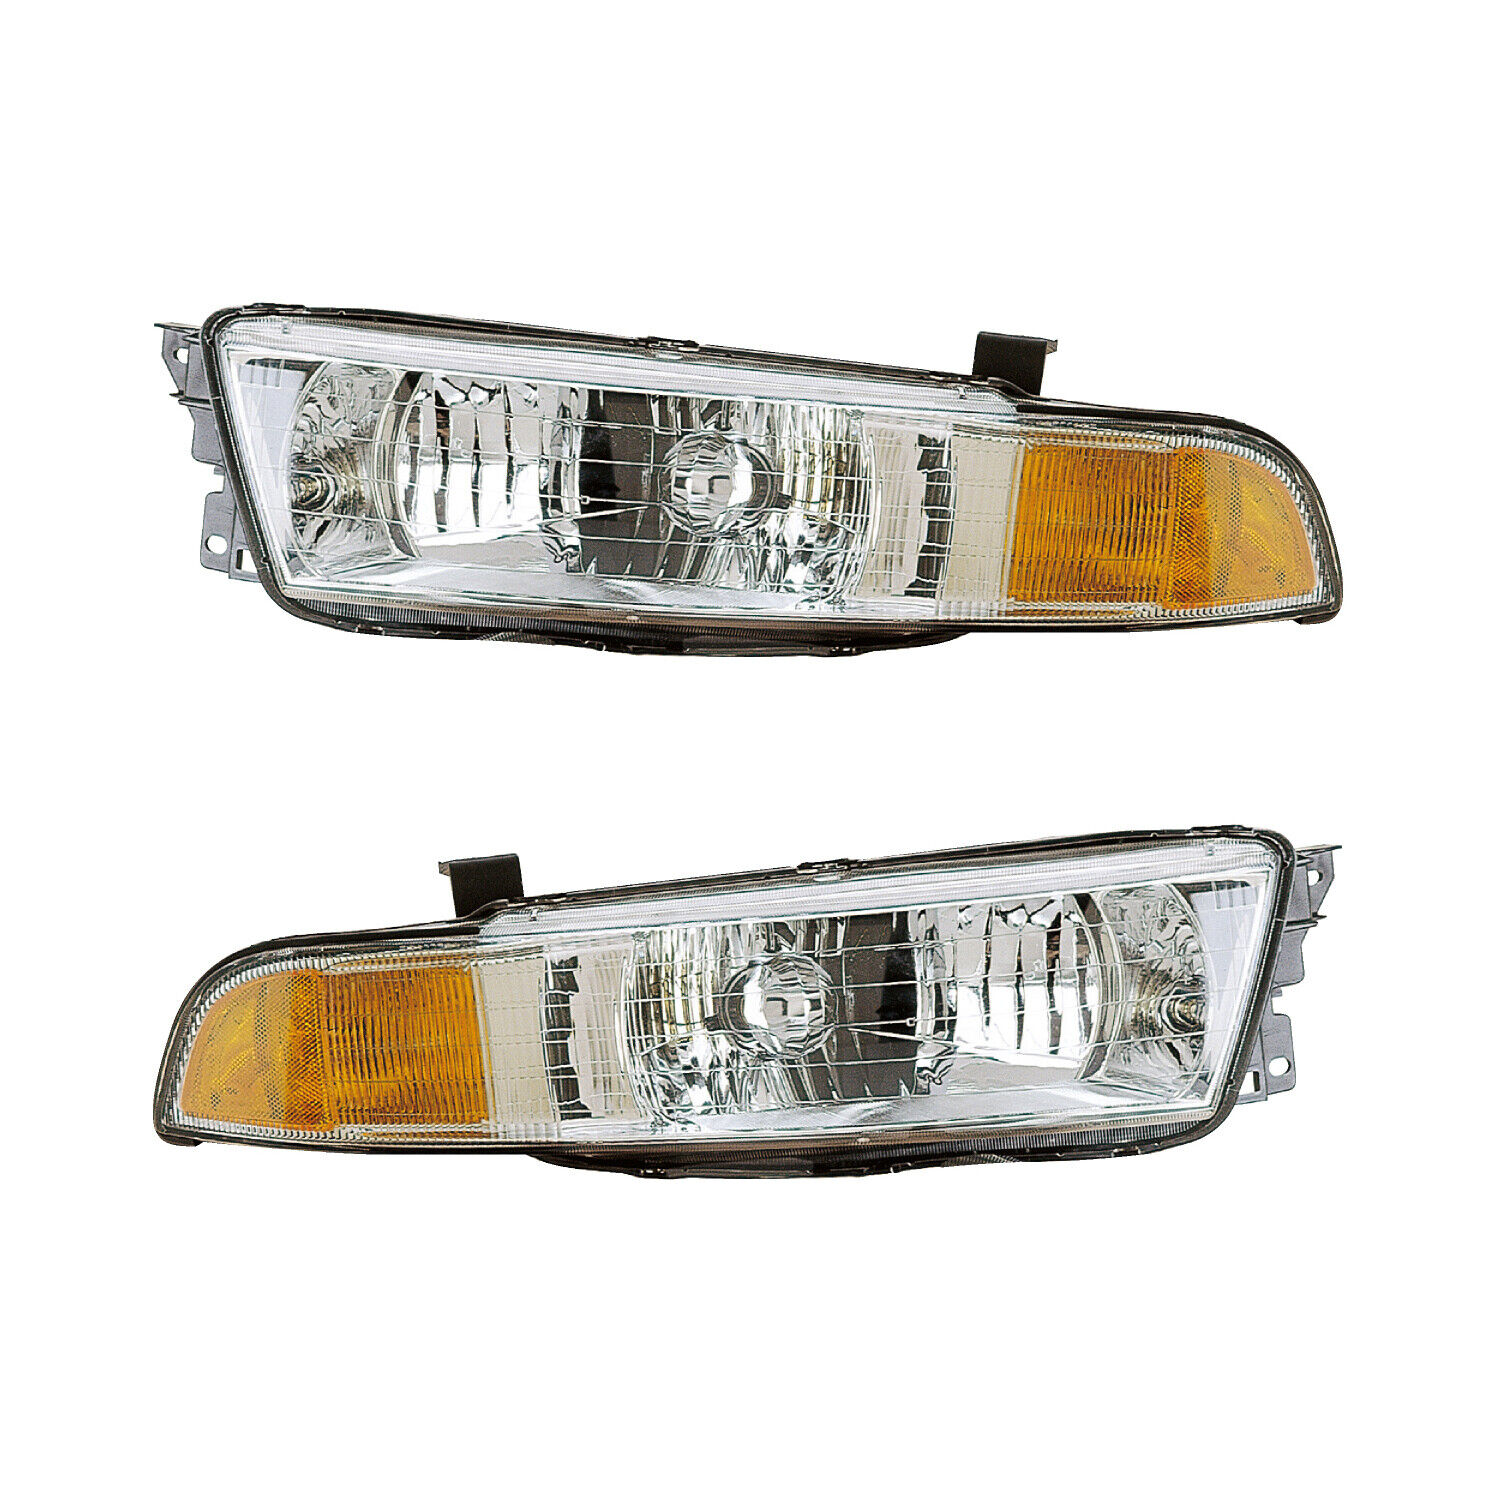 Headlights Front Lamps Pair Set for 99-01 Mitsubishi Galant Left & Right